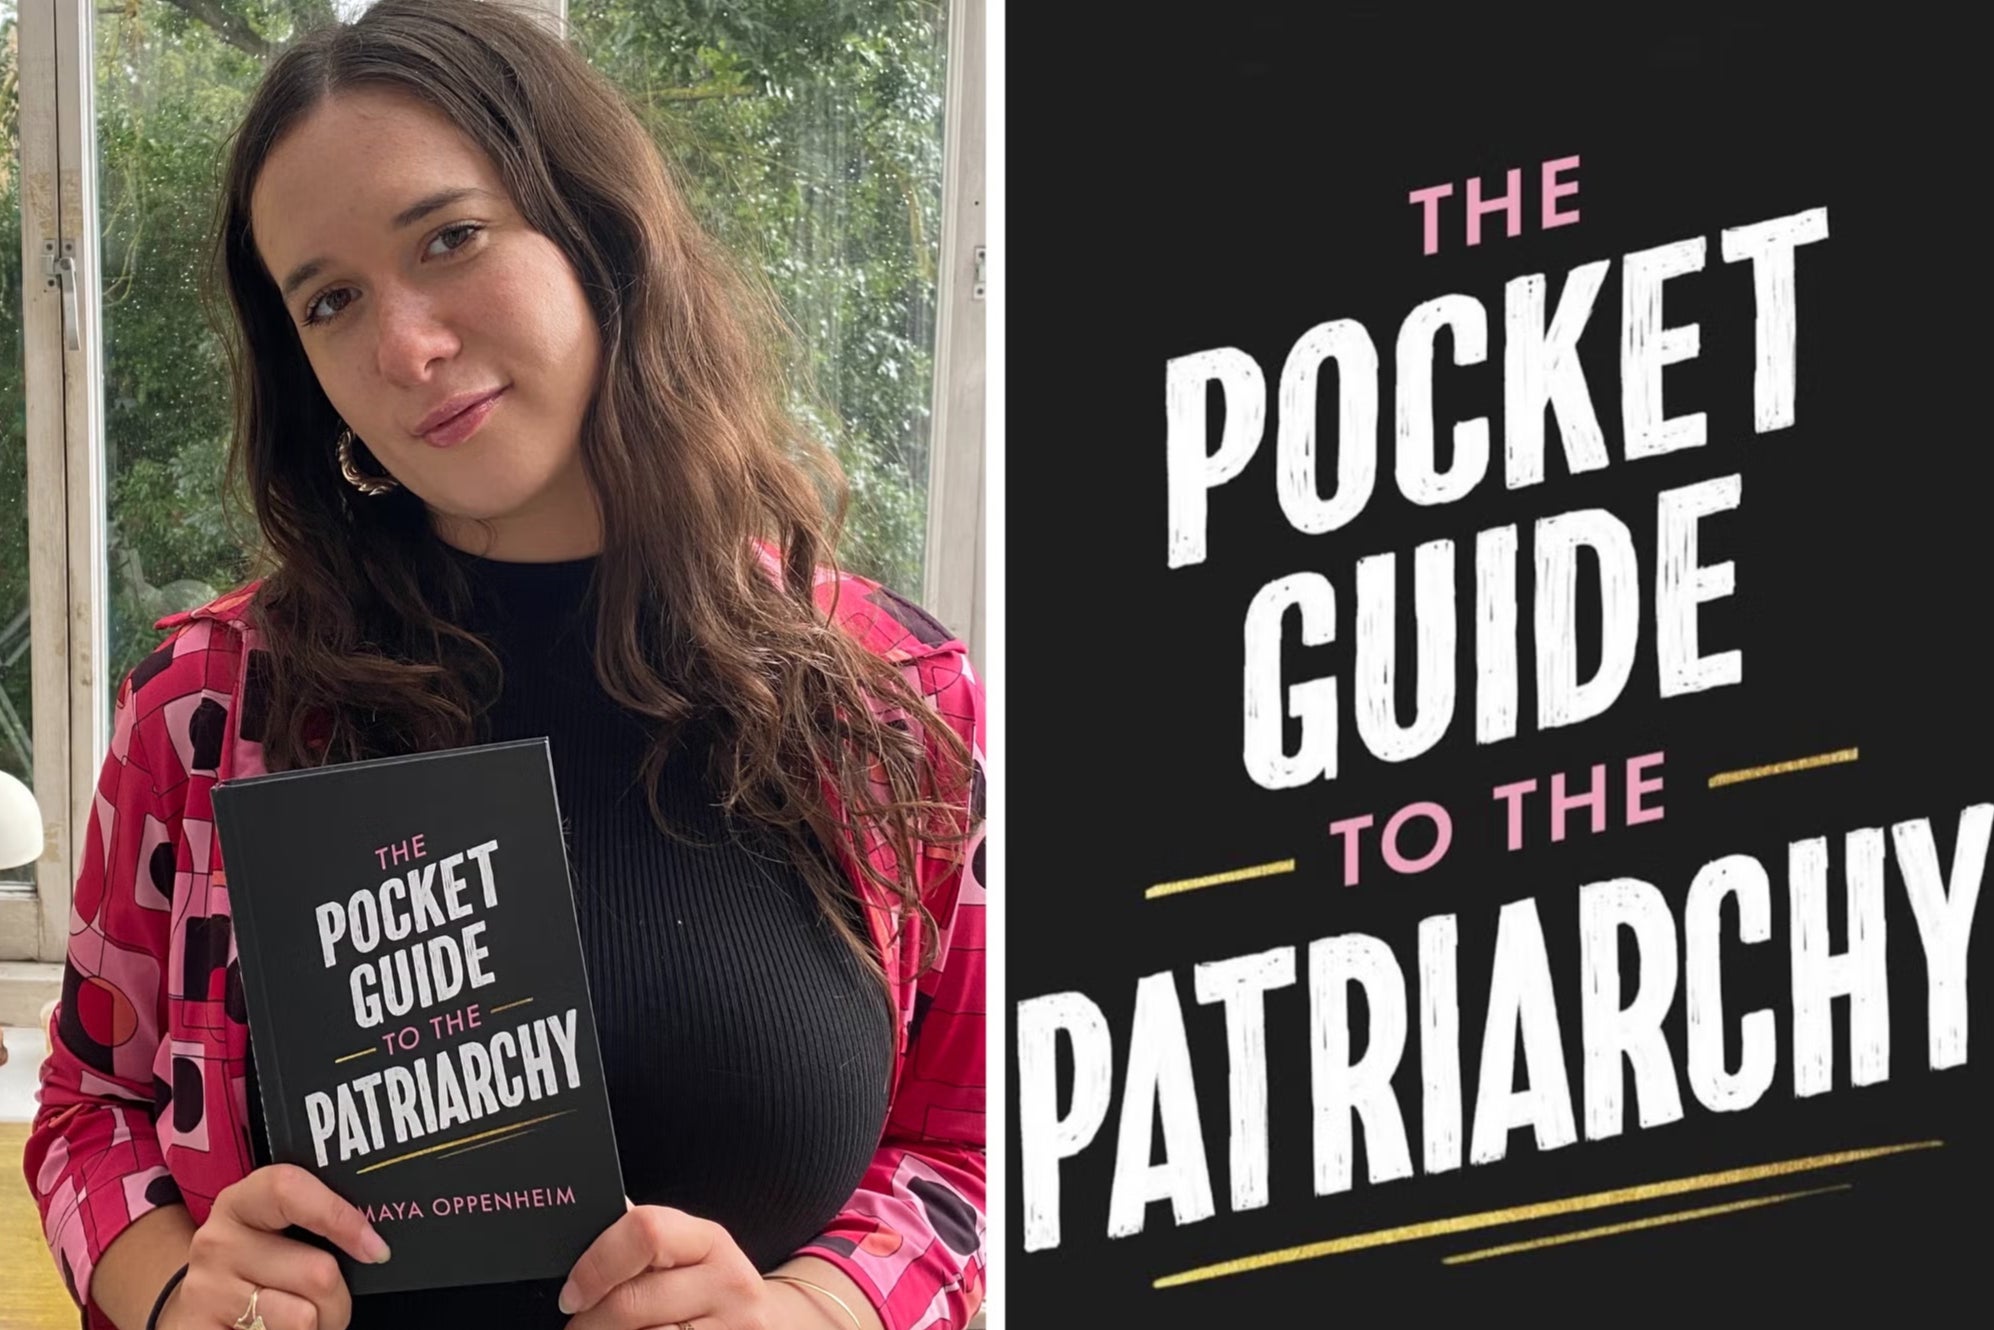 Author and journalist Maya Oppenheim with her book, ‘The Pocket Guide to the Patriarchy’